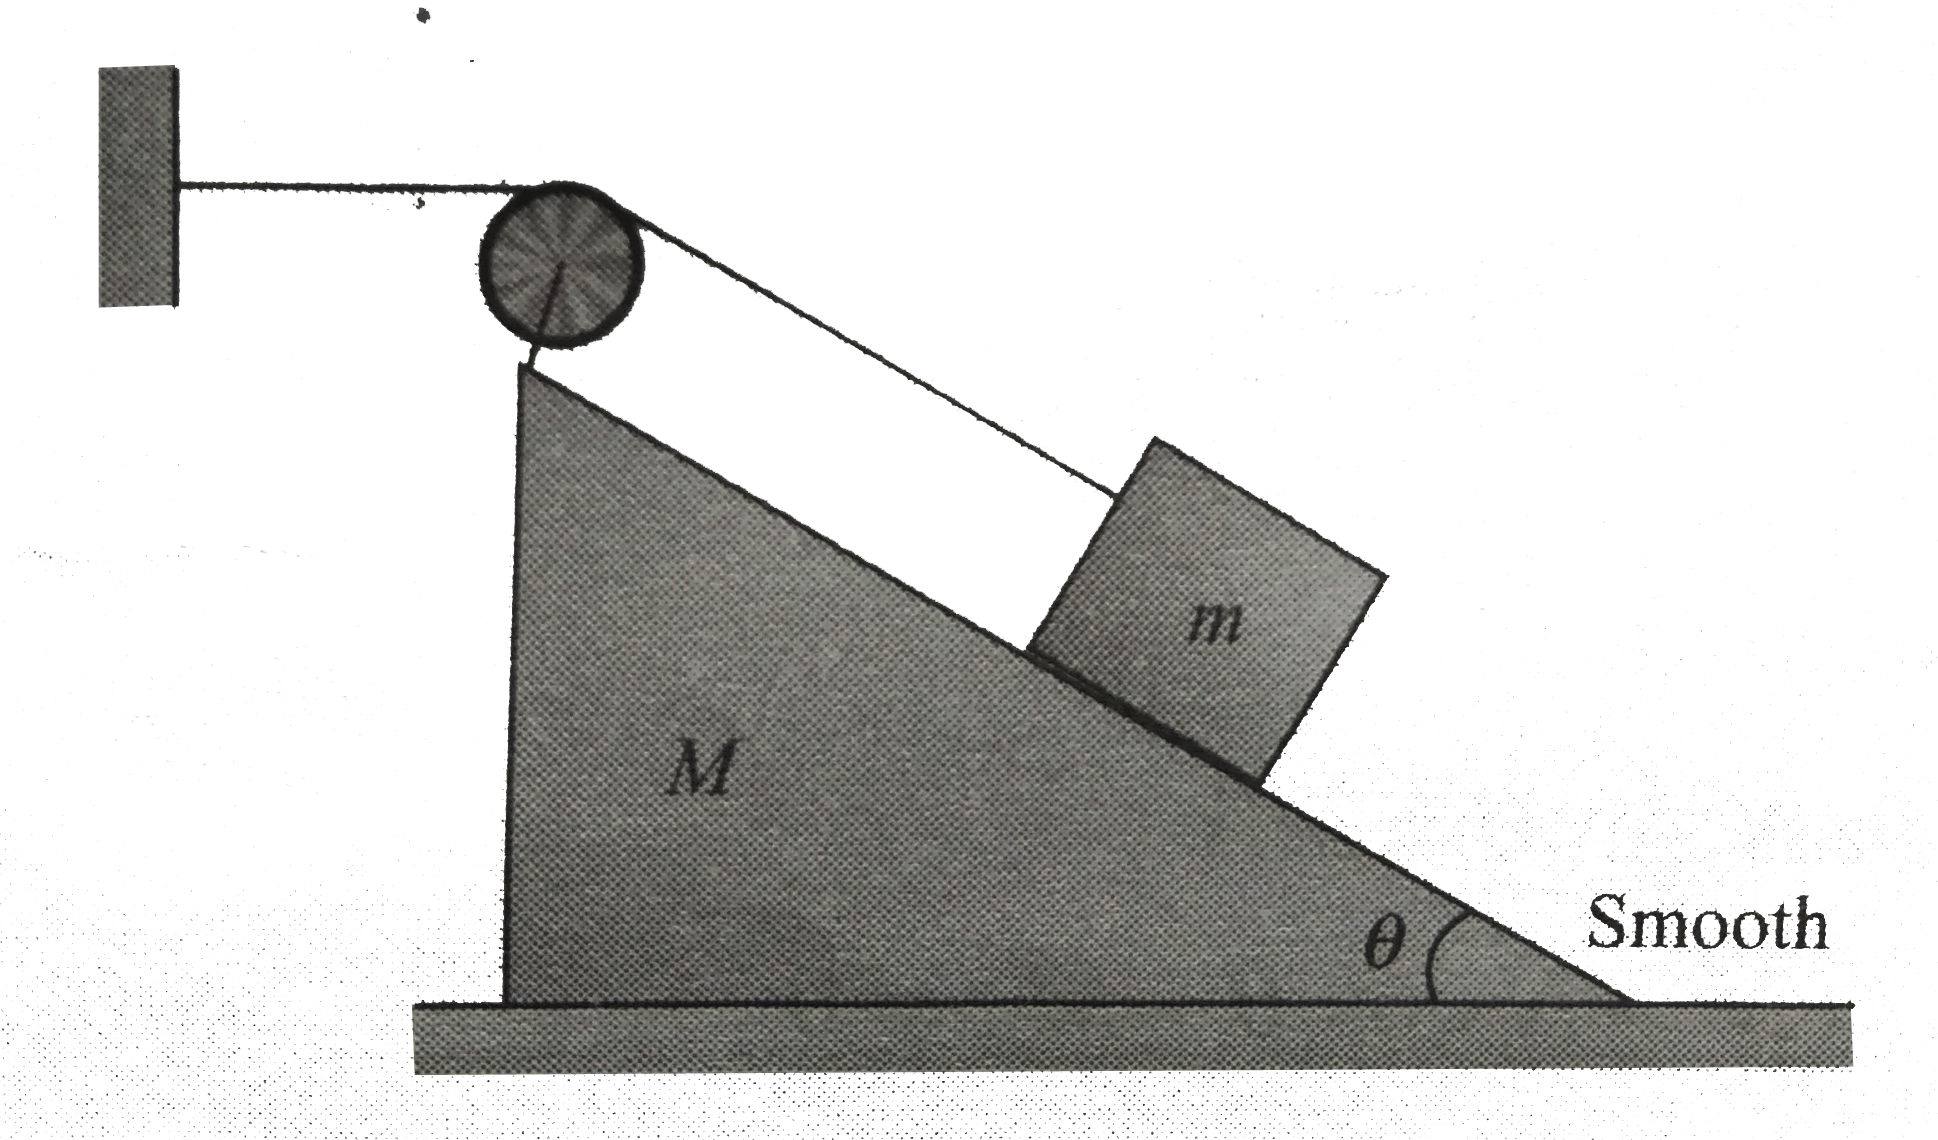 The mass of wedge, shown in figure is M and that of the block is m. Neglecting friction at all the places and mass of the pulley. Calculate the acceleration of wedge. Thread is inextensible.